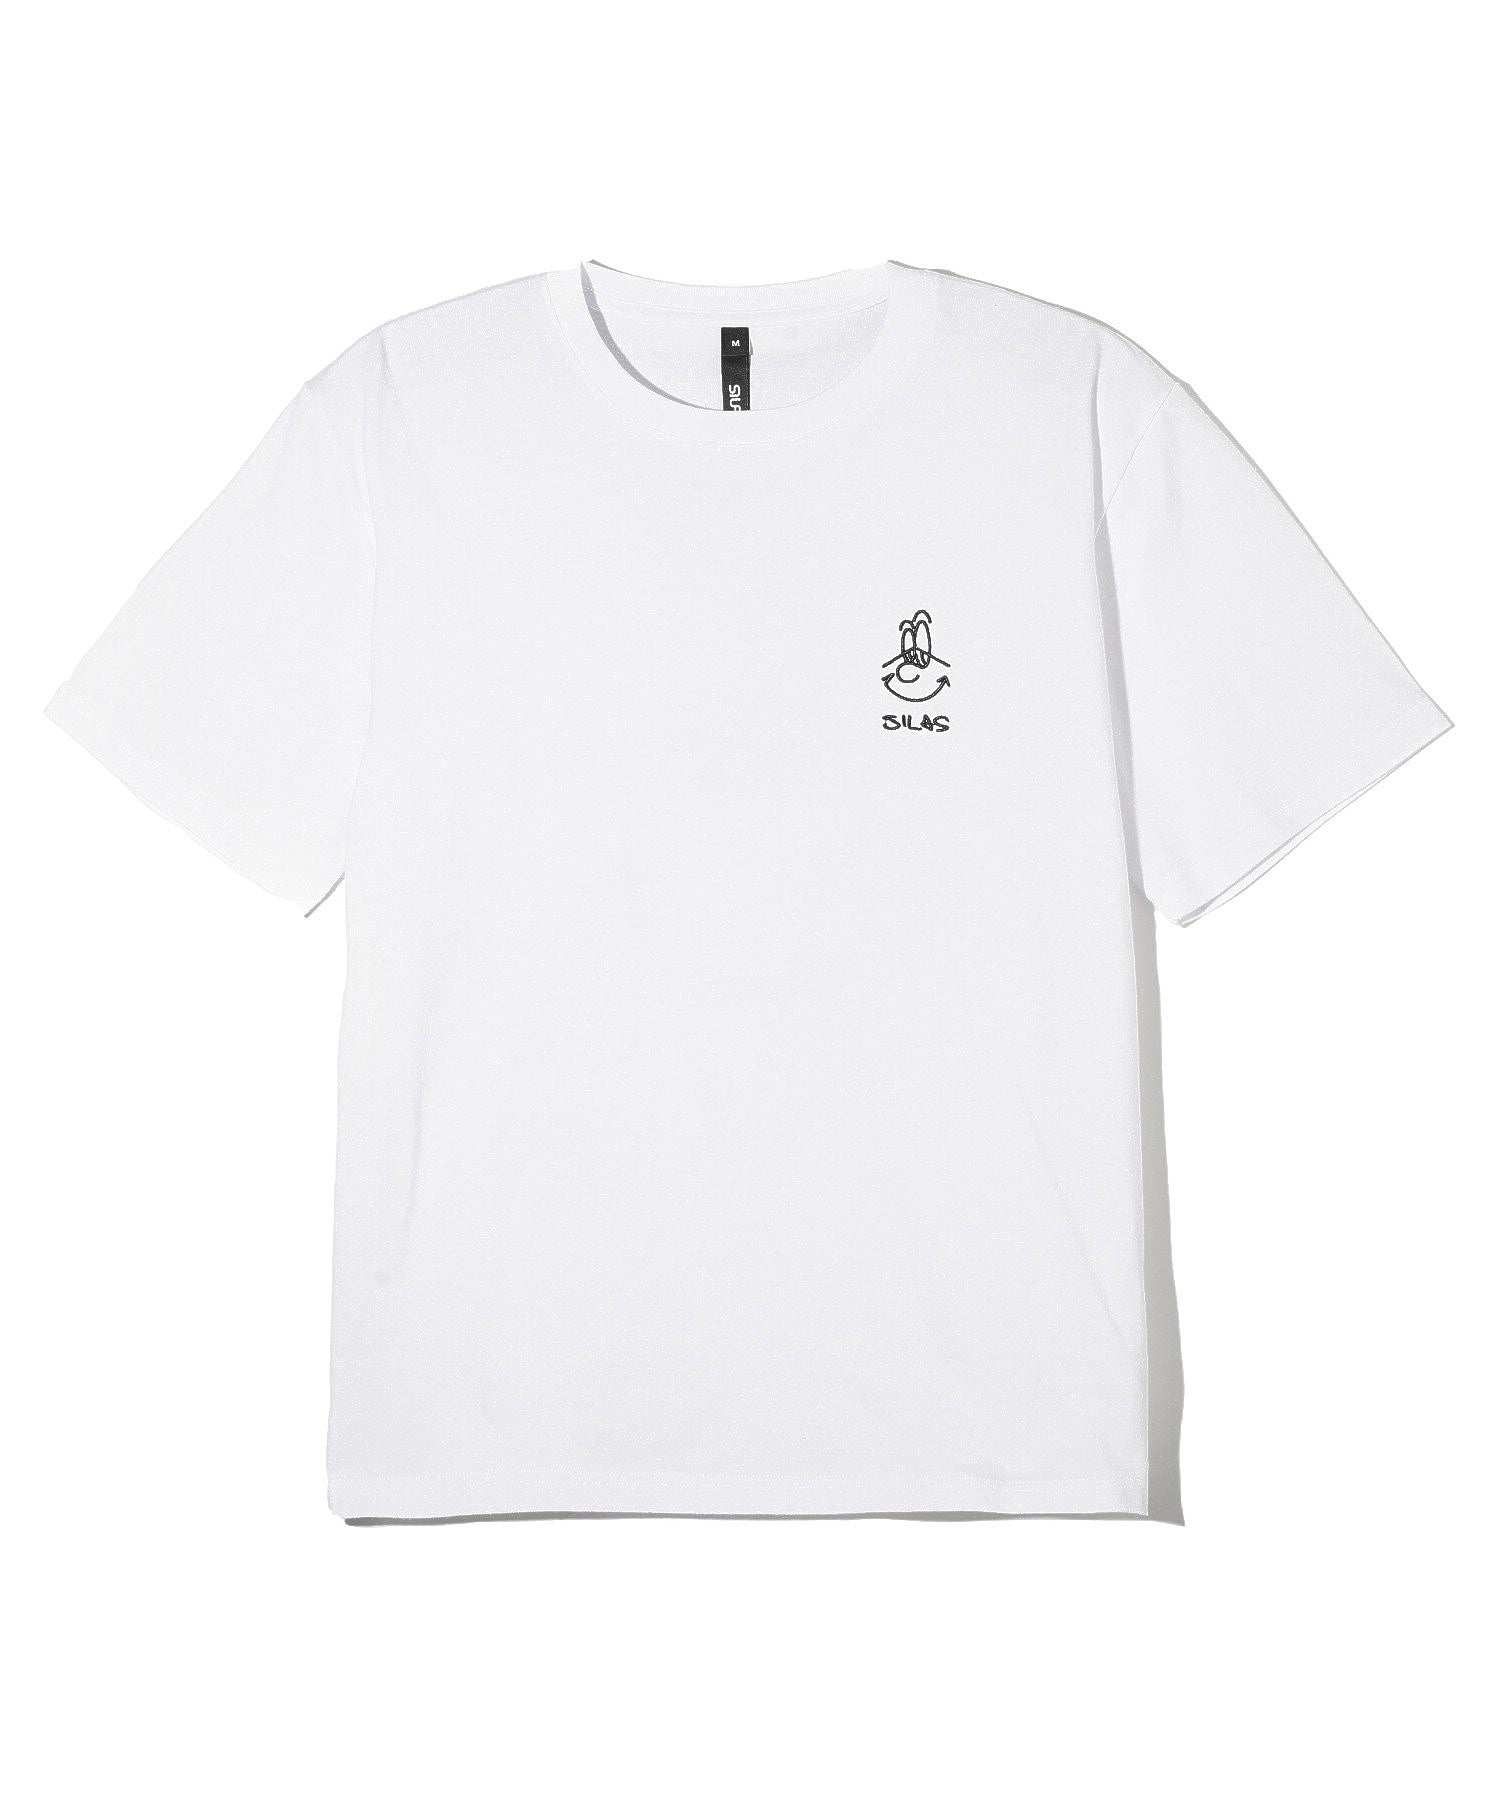 SILASxMAW MikeL S/S TEE